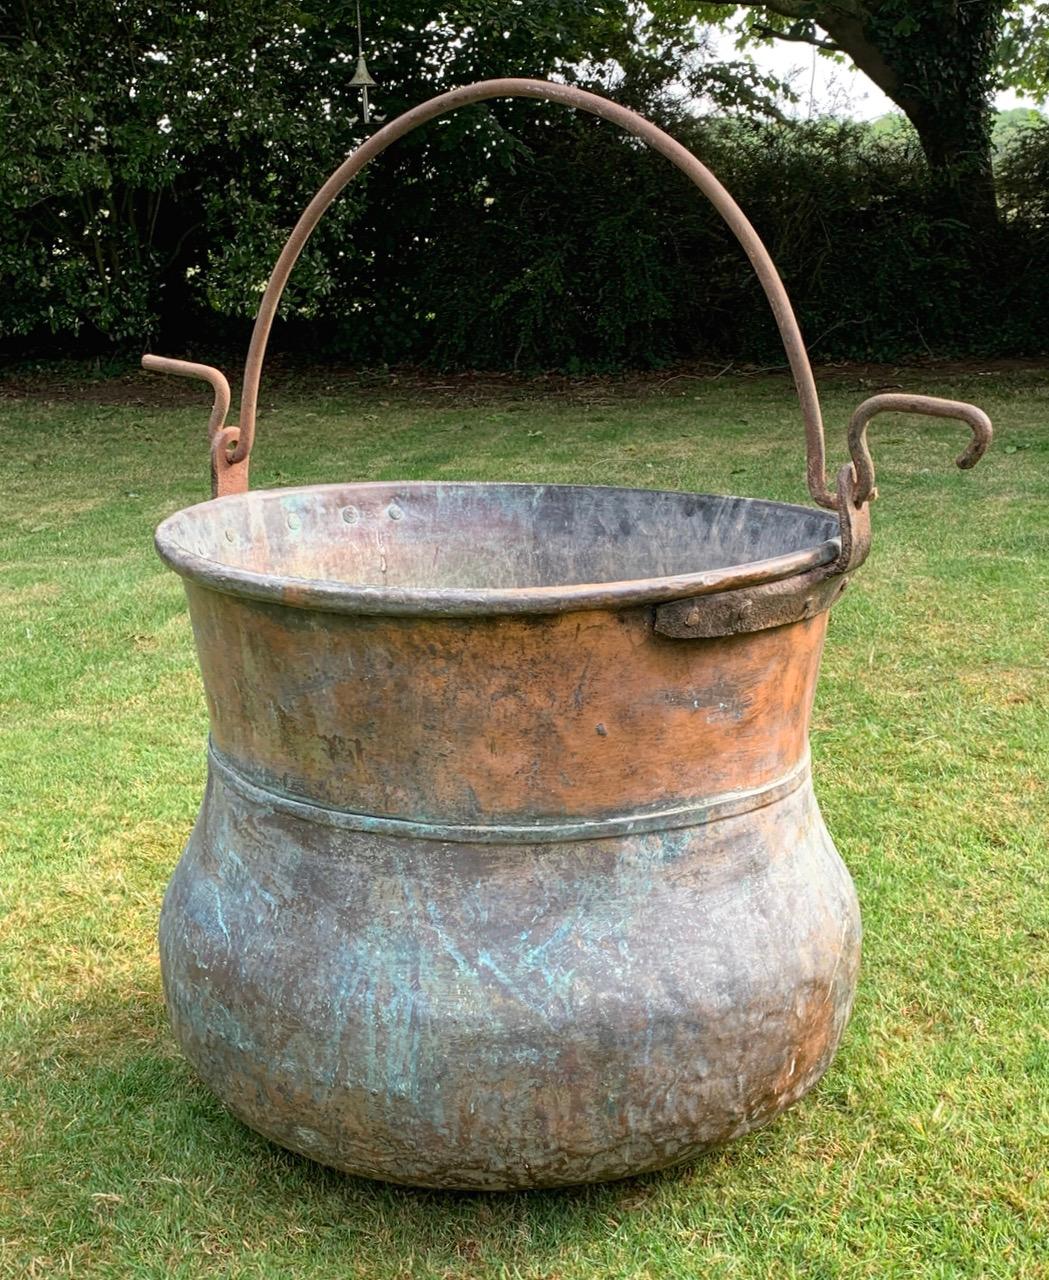 A lovely 19th century French copper cauldron vat with original iron handle. It is 74cm high to the rim not including the handle. It has a couple of period repair patches with rivets which adds to the look. It is not water tight but will make a